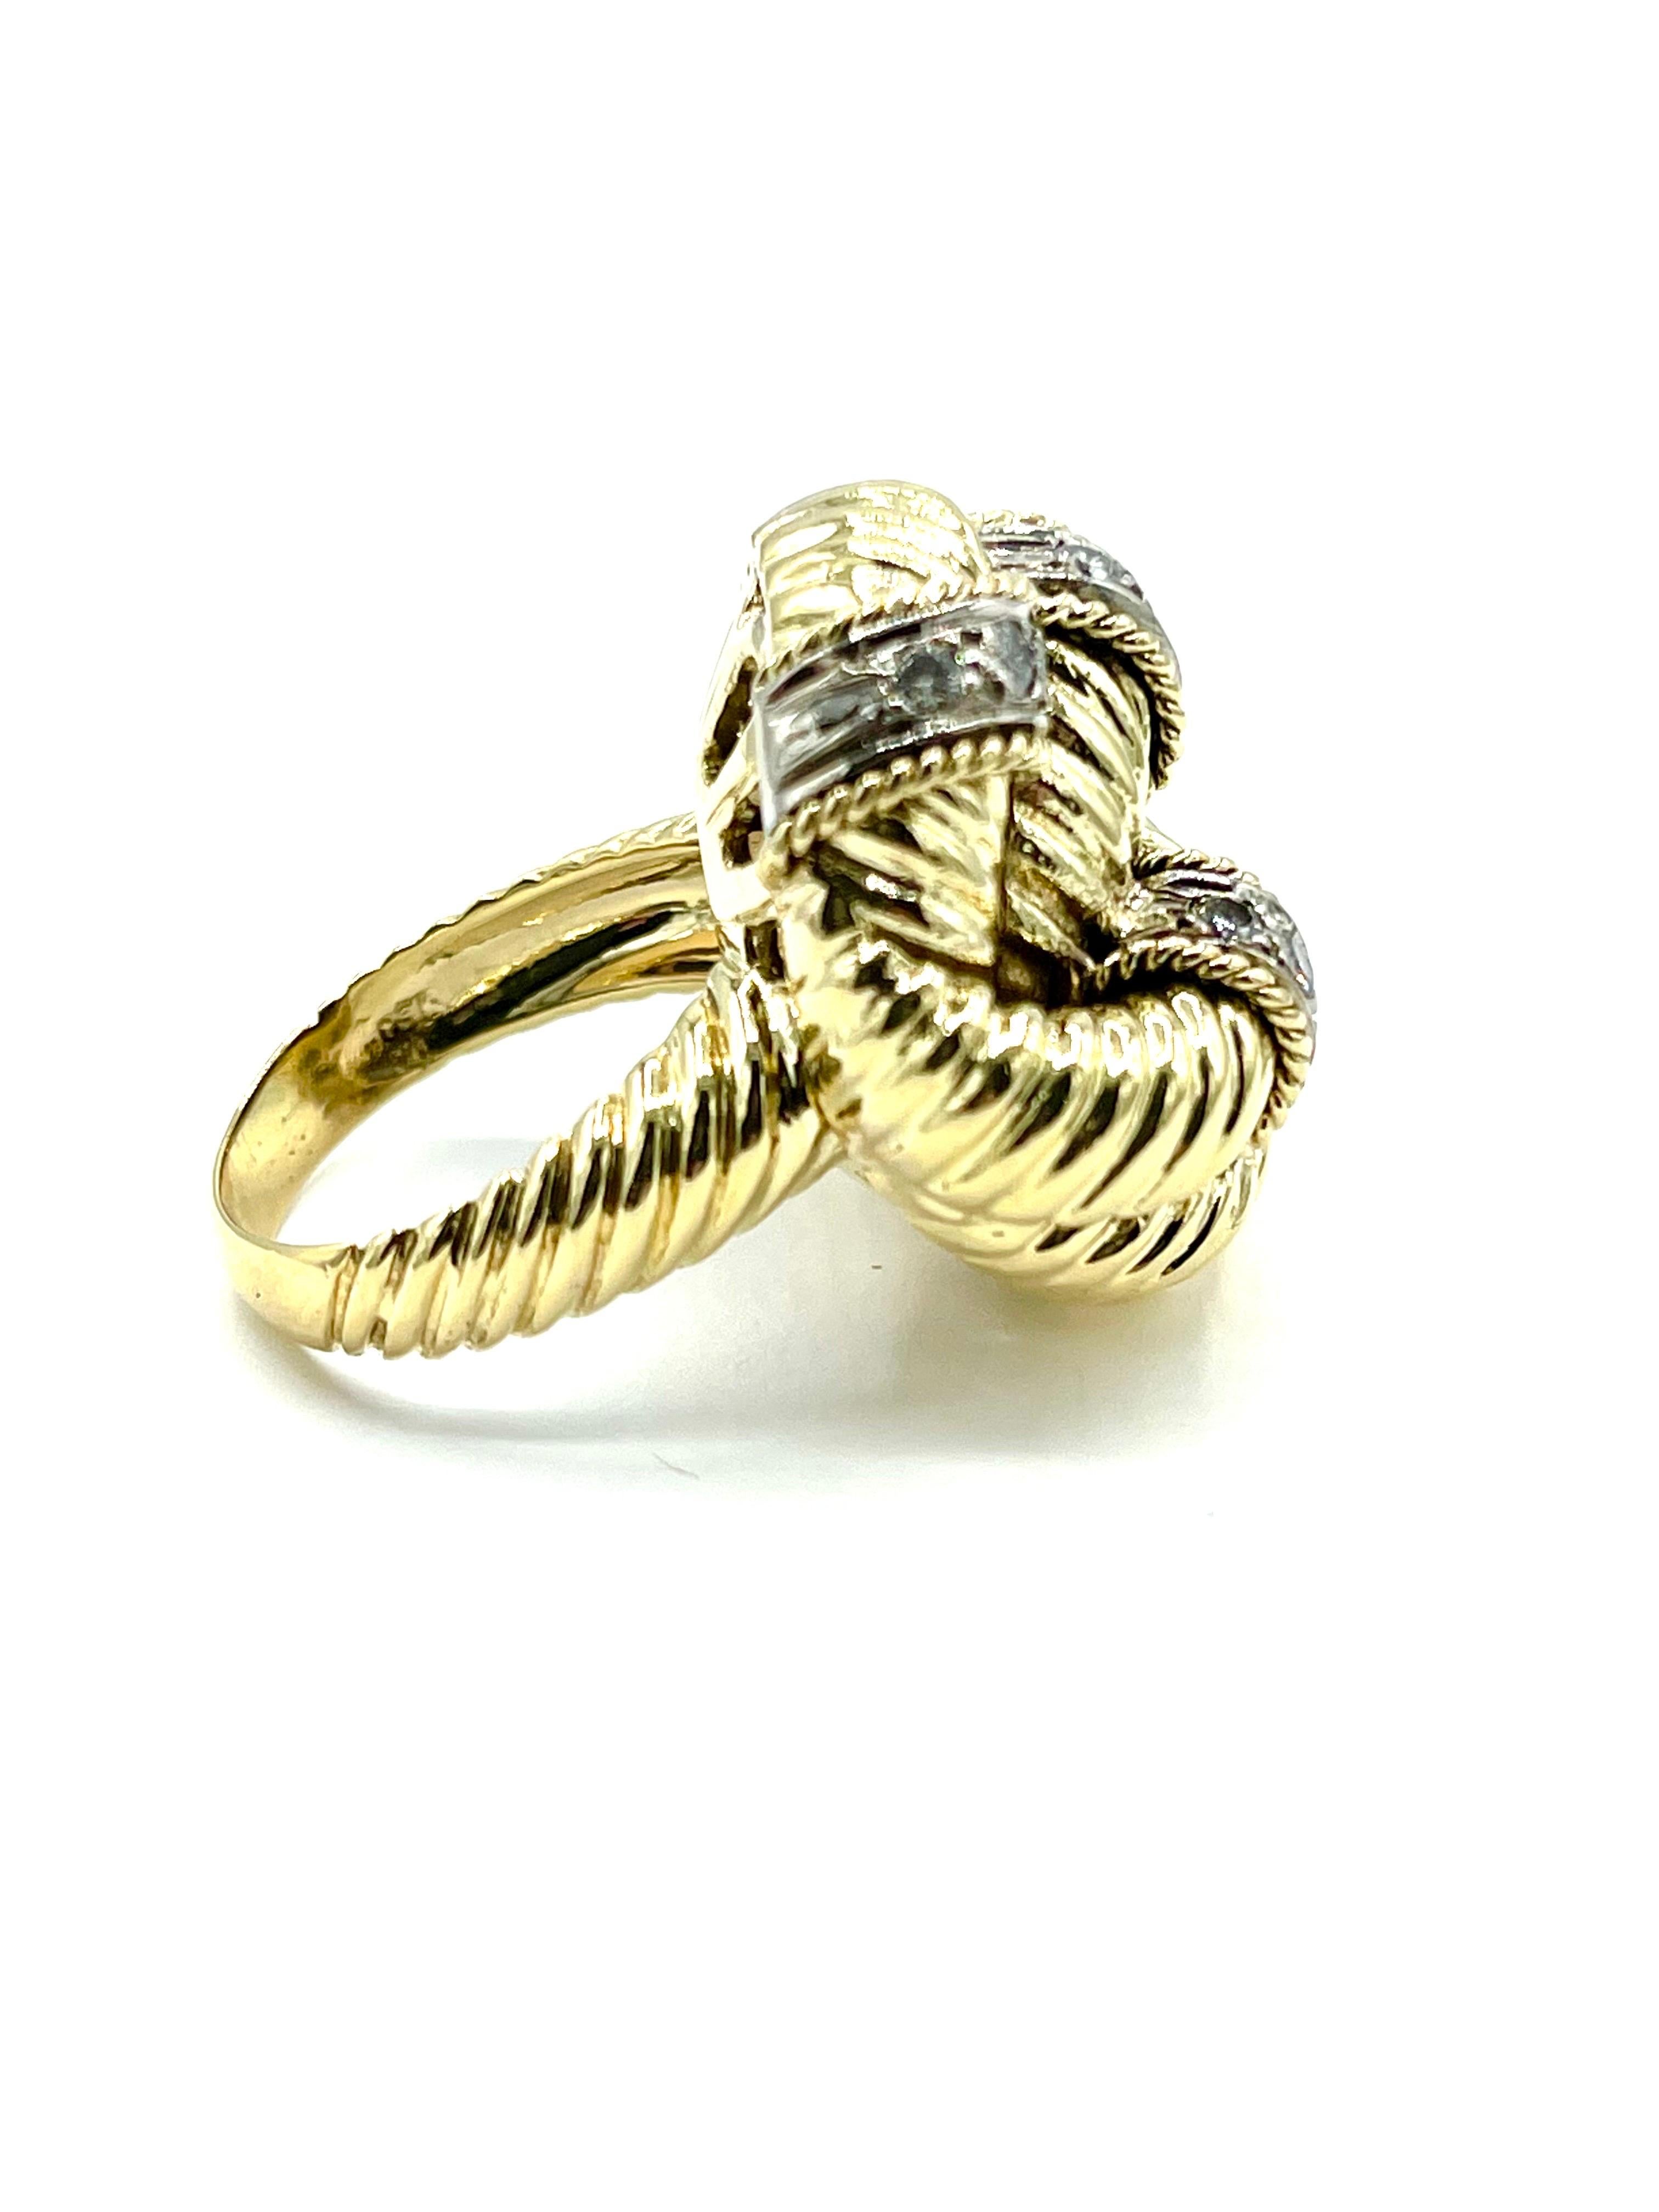 0.48 Carat Round Brilliant Diamond and 18K Yellow Gold Knot Cocktail Ring For Sale 4